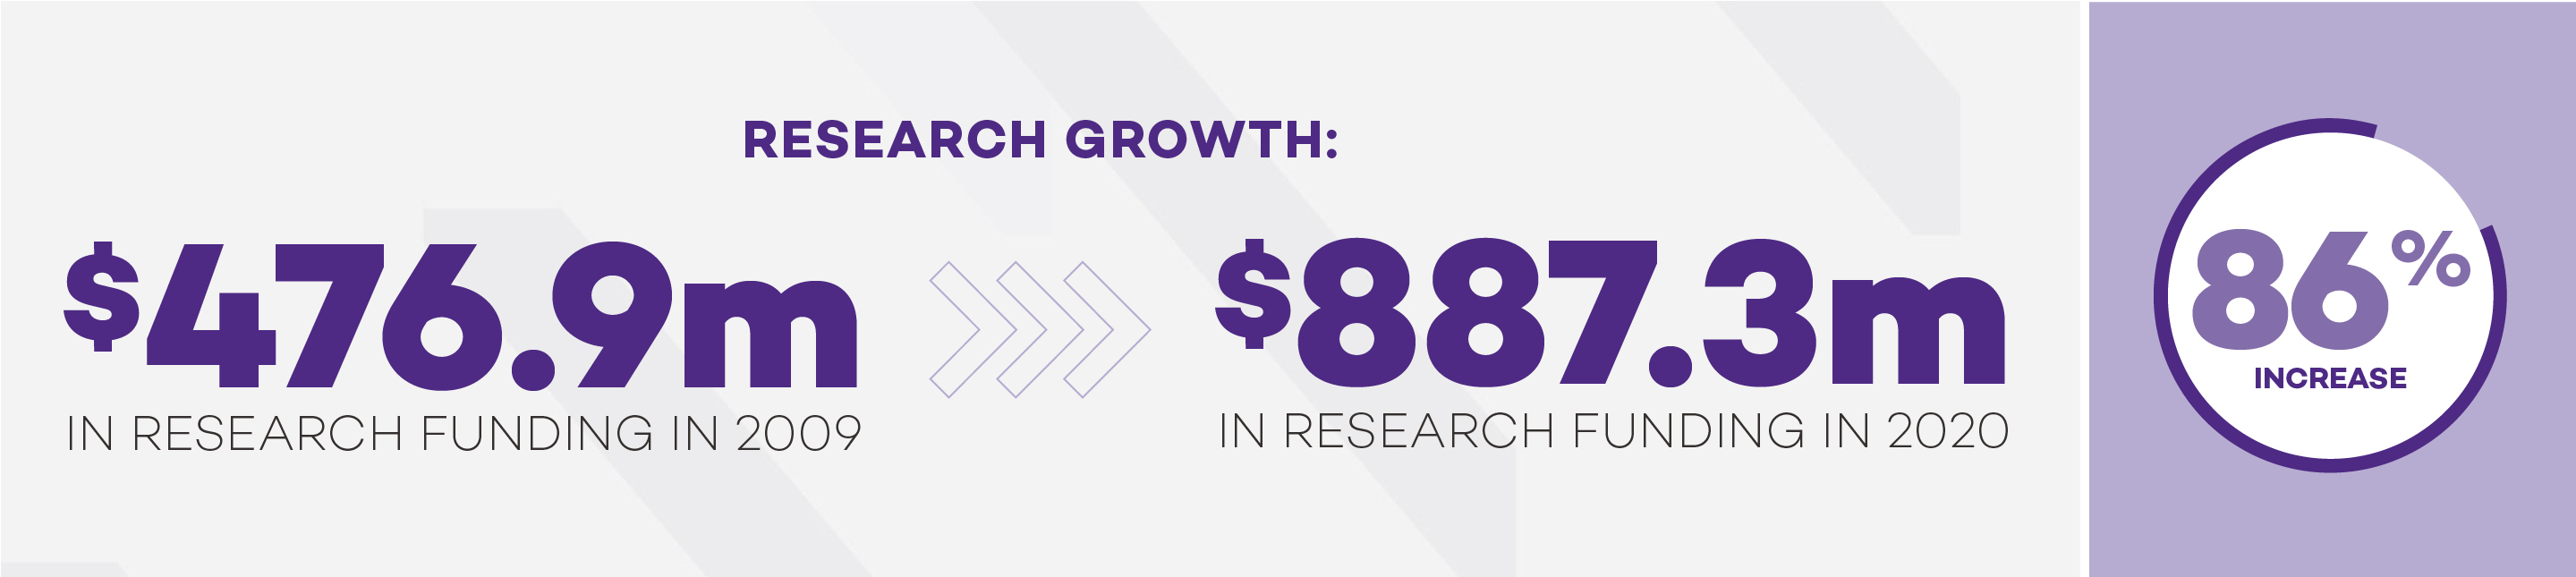 Research growth: $476.9m in research funding in 2009 >>> $887.3m in research funding in 2020 - 86% increase